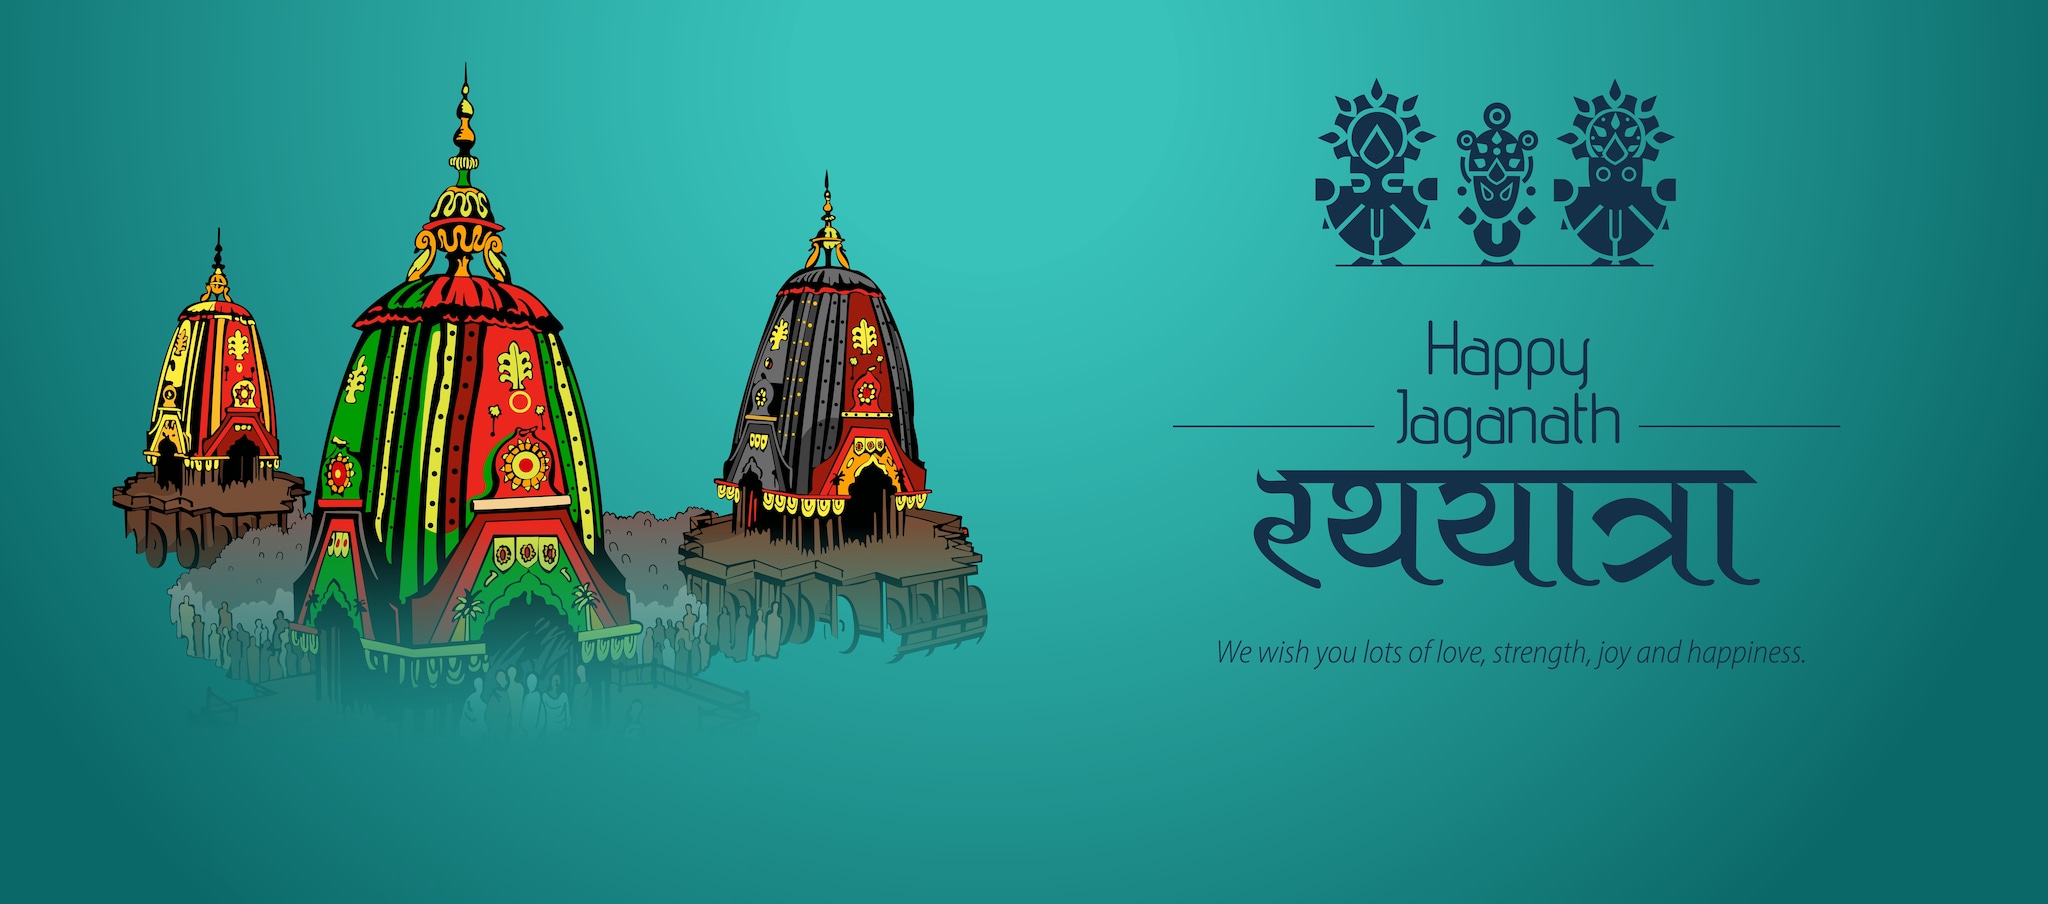 Happy Jagannath Rath Yatra 2022: Wishes Images, Quotes, Photos, Images, Facebook SMS & Messages to share with your loved ones.  (Image: Shutterstock)